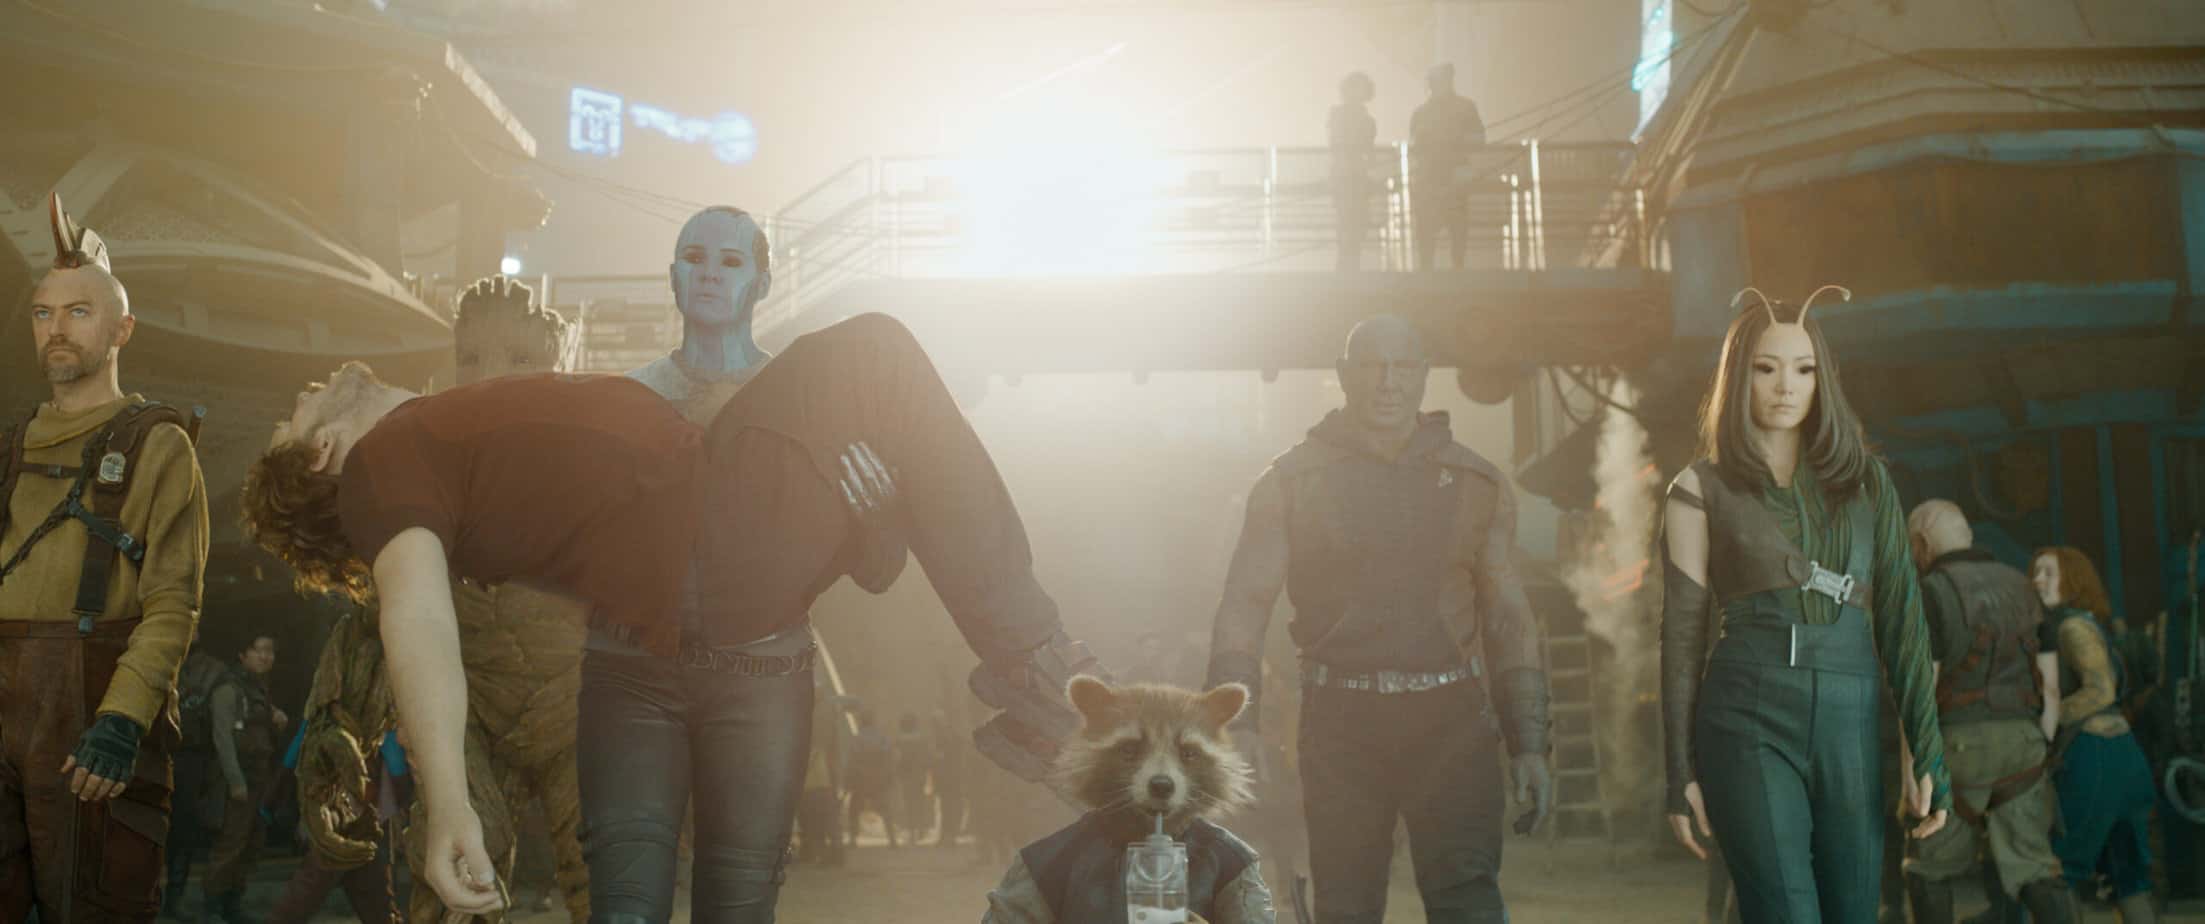 Age rating of GUARDIANS OF THE GALAXY VOL. 3 parents guide. All the guardians walking together with Star Lord in Drax's arms.